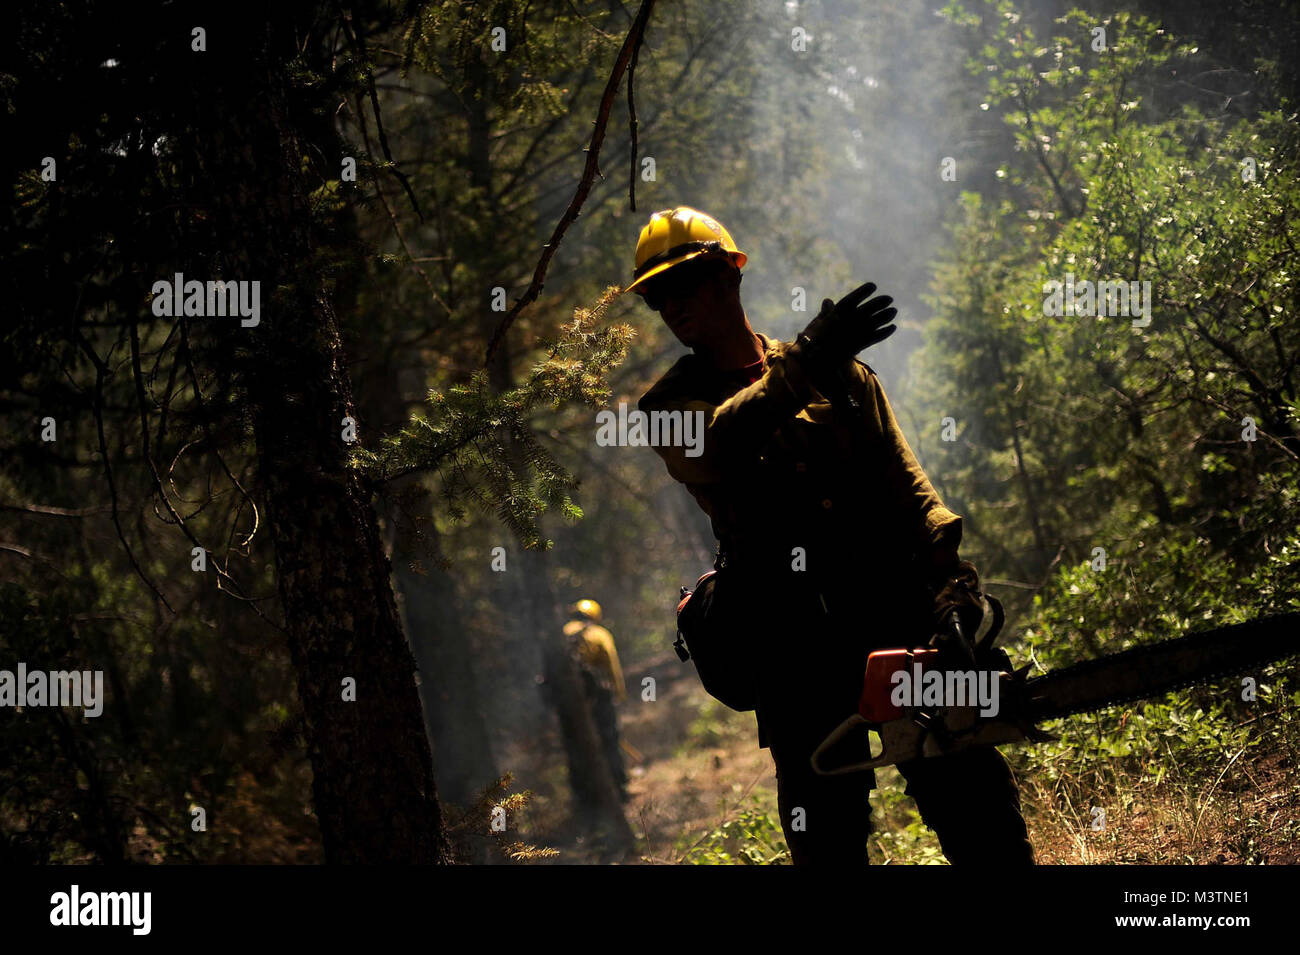 Vandenberg Air Force Base Hot Shot fire fighter Brad Mabery prepares to cut a tree with his chainsaw while cutting and clearing a fire line on June 28, 2012 in the Mount Saint Francois area of Colorado Springs, Co. His team is helping to battle several fires in Waldo Canyon.  The Waldo Canyon fire has grown to 18,500 acres and burned over 300 homes. Currently, more than 90 firefighters from the Academy, along with assets from Air Force Space Command; F.E. Warren Air Force Base, Wyo.; Fort Carson, Colo.; and the local community continue to fight the Waldo Canyon fire.(U.S. Air Force Photo by: M Stock Photo